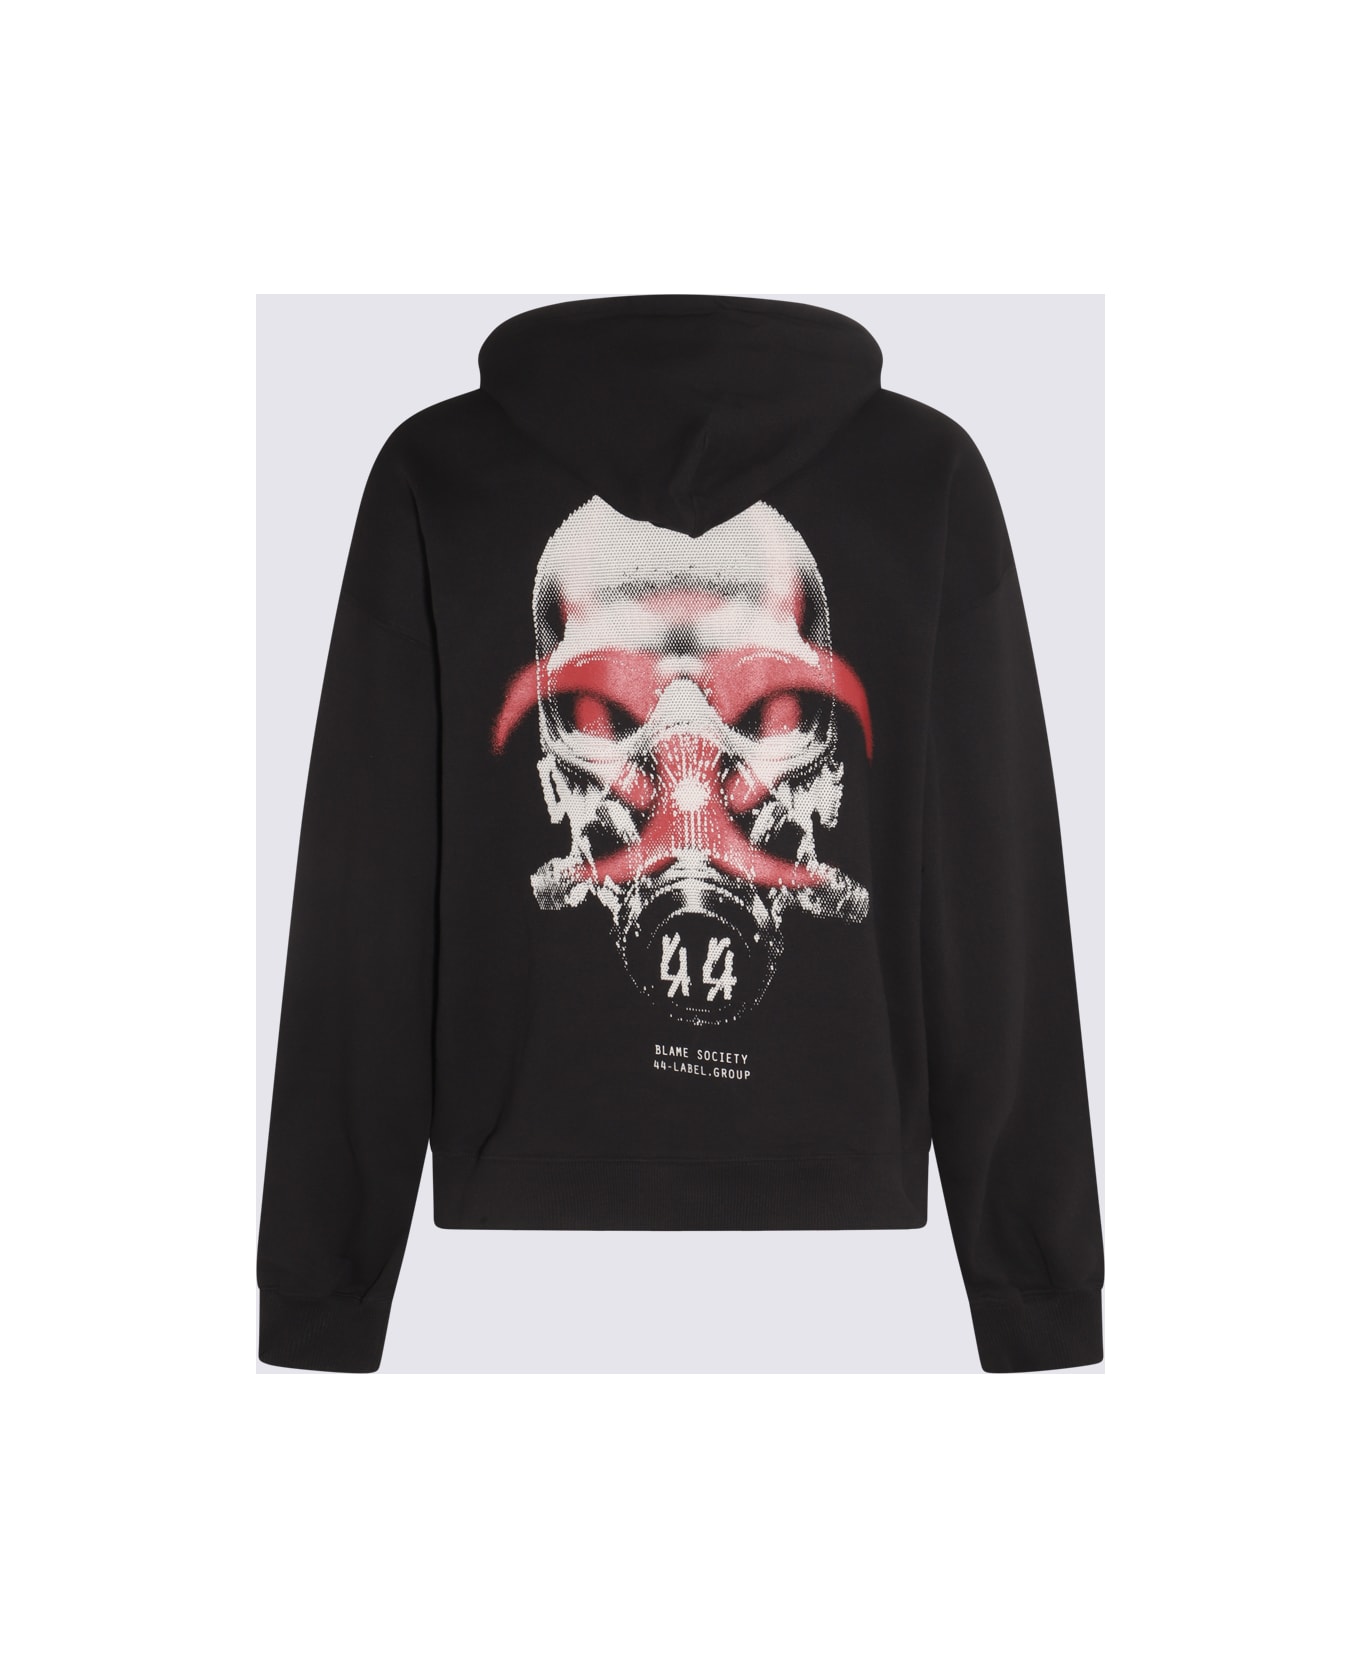 44 Label Group Black, White And Red Cotton Sweatshirt - Black